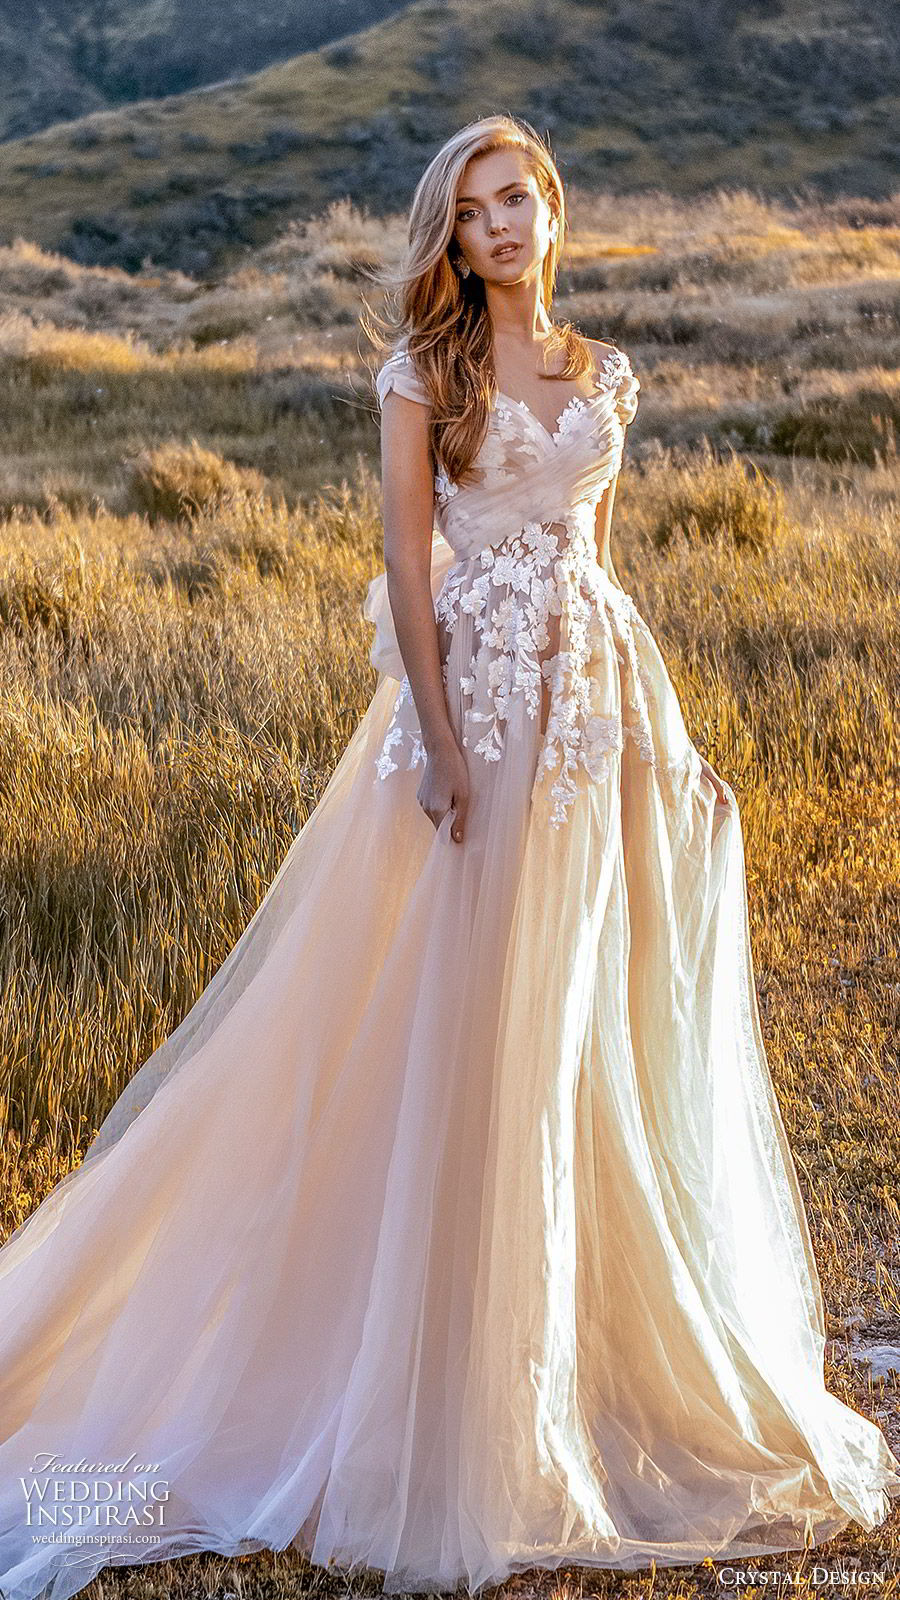 Blush Wedding Gowns 2020
 Crystal Design Couture 2020 Wedding Dresses — “Catching